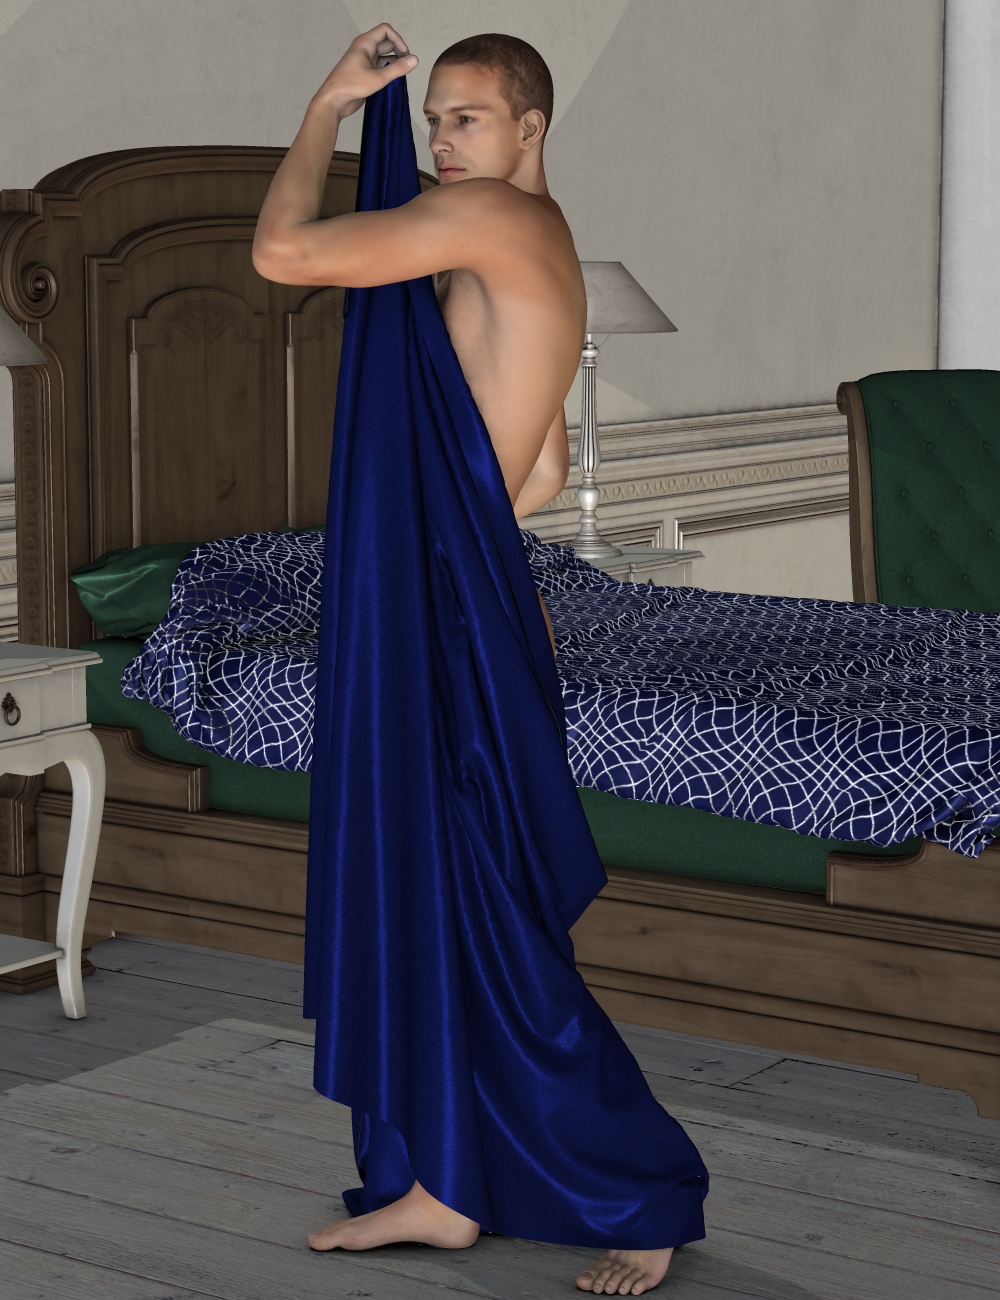 Beyond Bedding for Poser by: Khory, 3D Models by Daz 3D